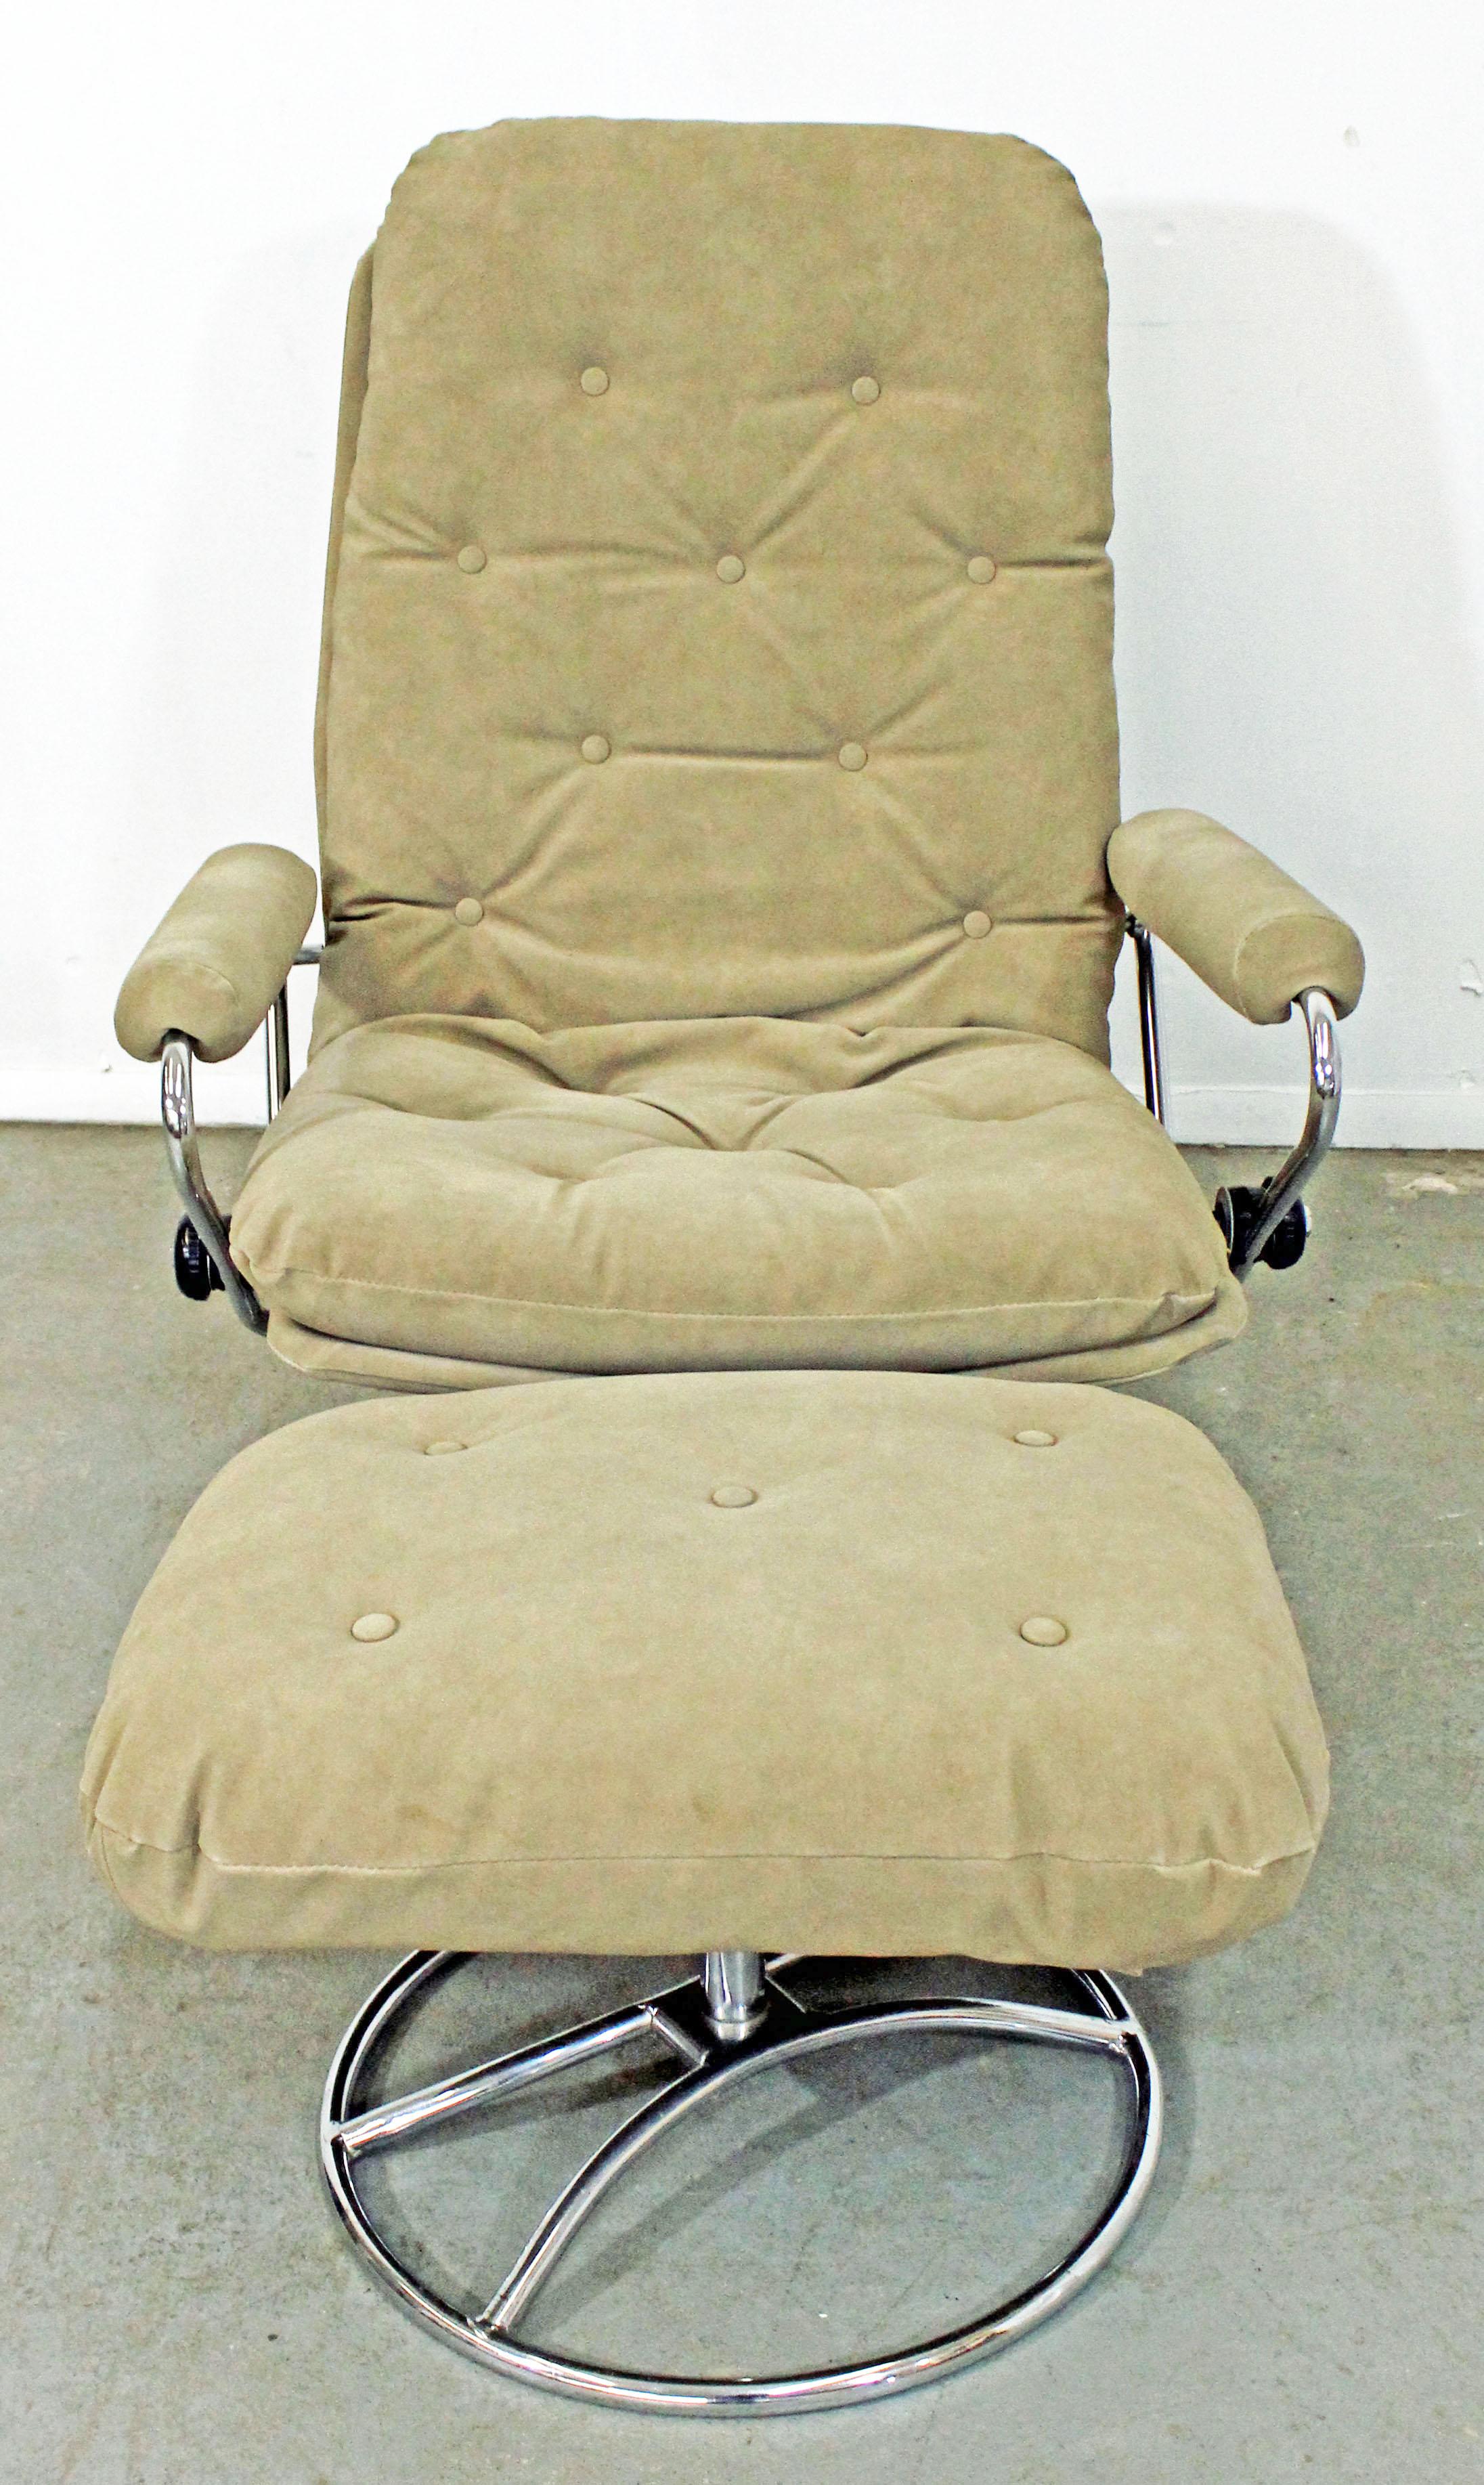 What a find. Offered is a Mid-Century Modern lounge chair and ottoman by Ekornes Stressless of Norway. The chair has a chrome base and suede style upholstery, plus it swivels and reclines. It is in good condition considering its age, showing little